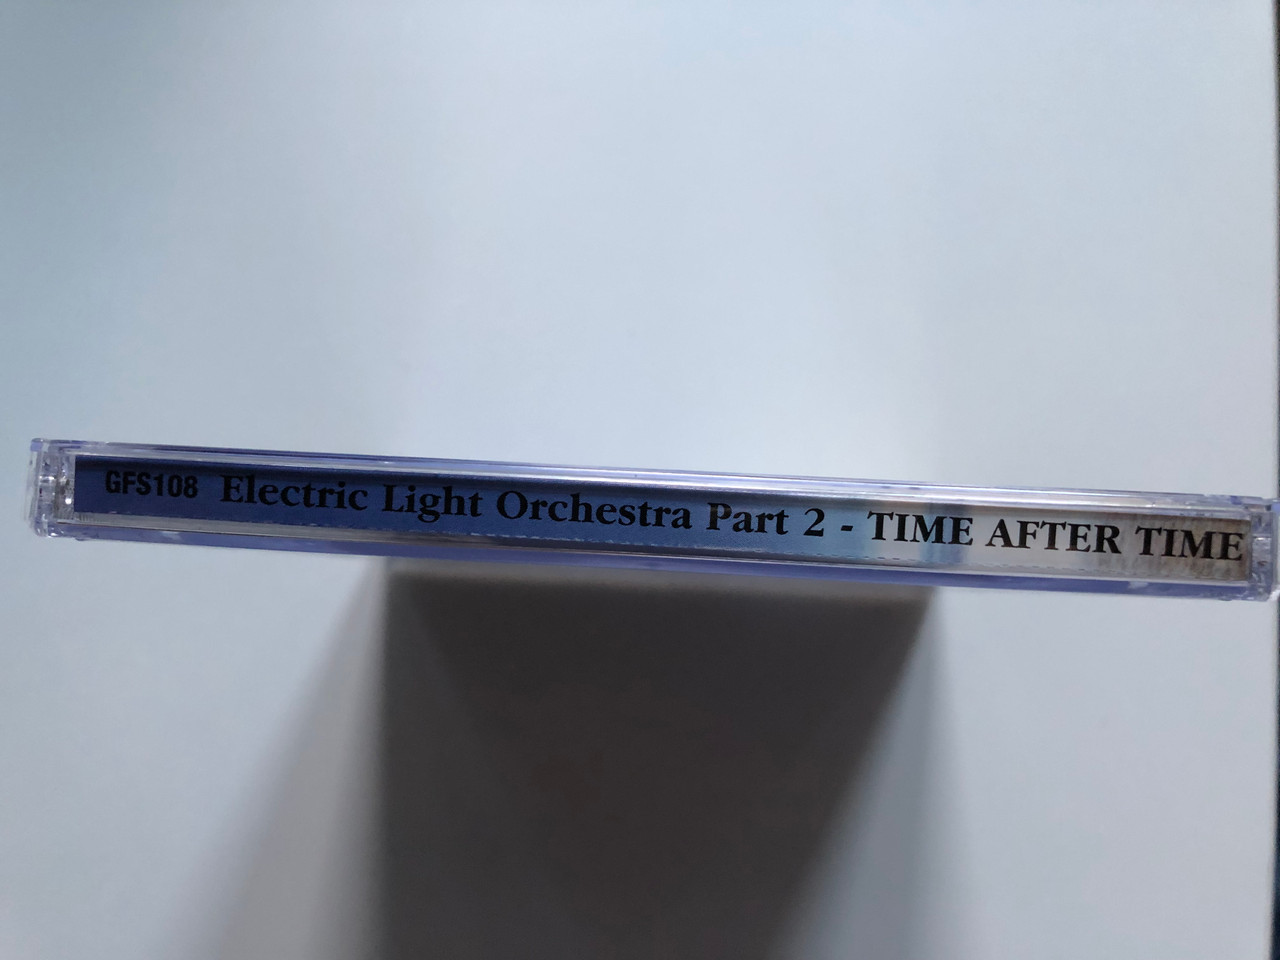 https://cdn10.bigcommerce.com/s-62bdpkt7pb/products/0/images/228494/Electric_Light_Orchestra_Part_2_Time_After_Time_Their_greatest_hits_recorded_live_and_in_Dolby_Surround_including_Hold_On_Tight_Mr._Blue_Sky_Dont_Bring_Me_Down_Strange_Magic_Going_3__46848.1653372599.1280.1280.JPG?c=2&_gl=1*18e7zzr*_ga*MjA2NTIxMjE2MC4xNTkwNTEyNTMy*_ga_WS2VZYPC6G*MTY1MzM3MTM3Ni40MDguMS4xNjUzMzcyMjEyLjM4